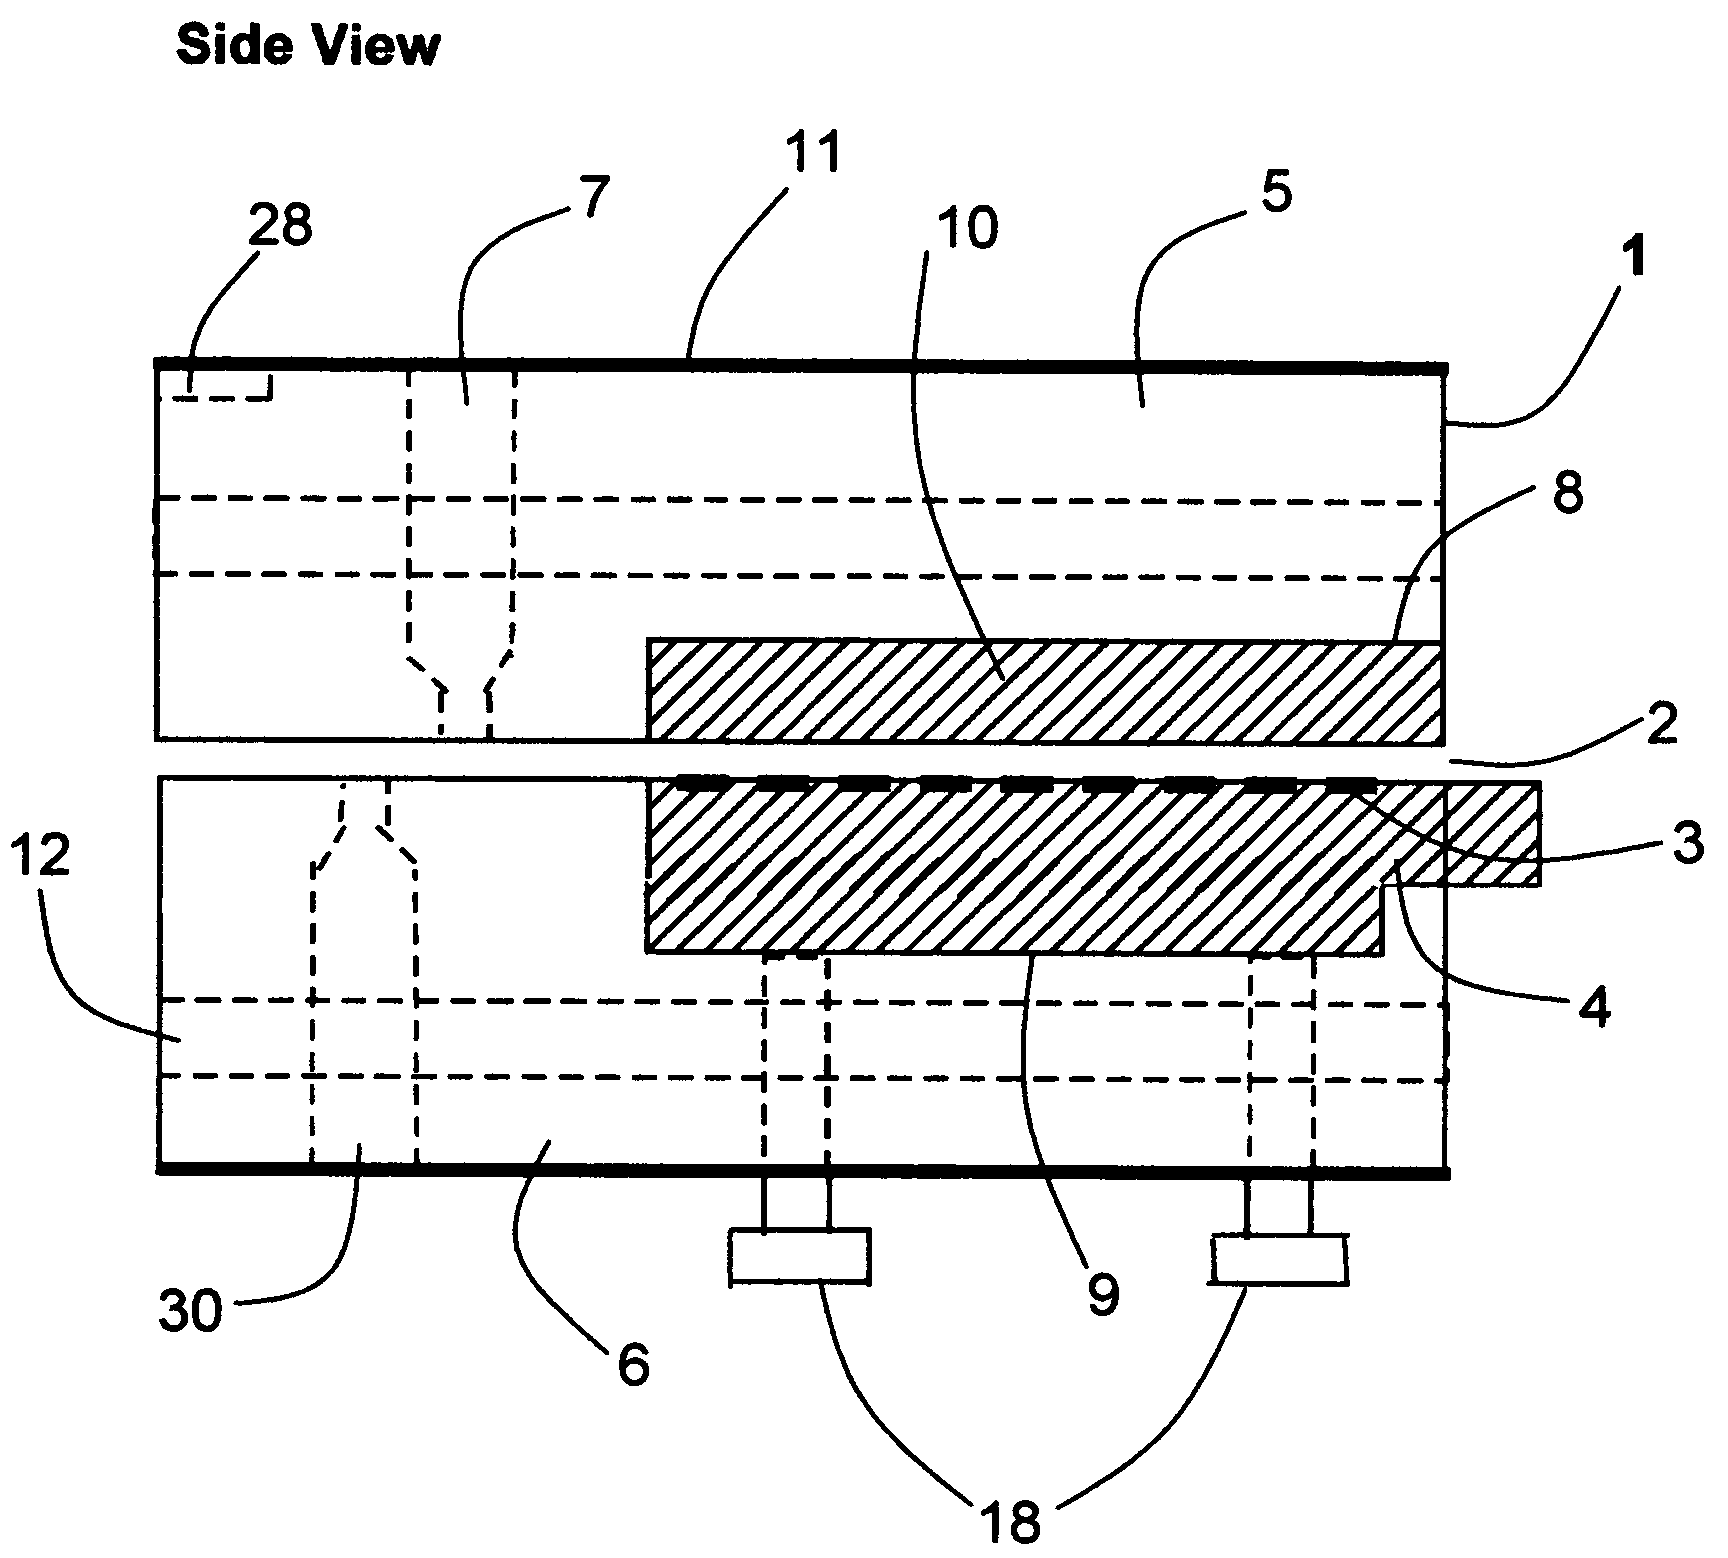 Dielectric slit die for in-line monitoring of liquids processing